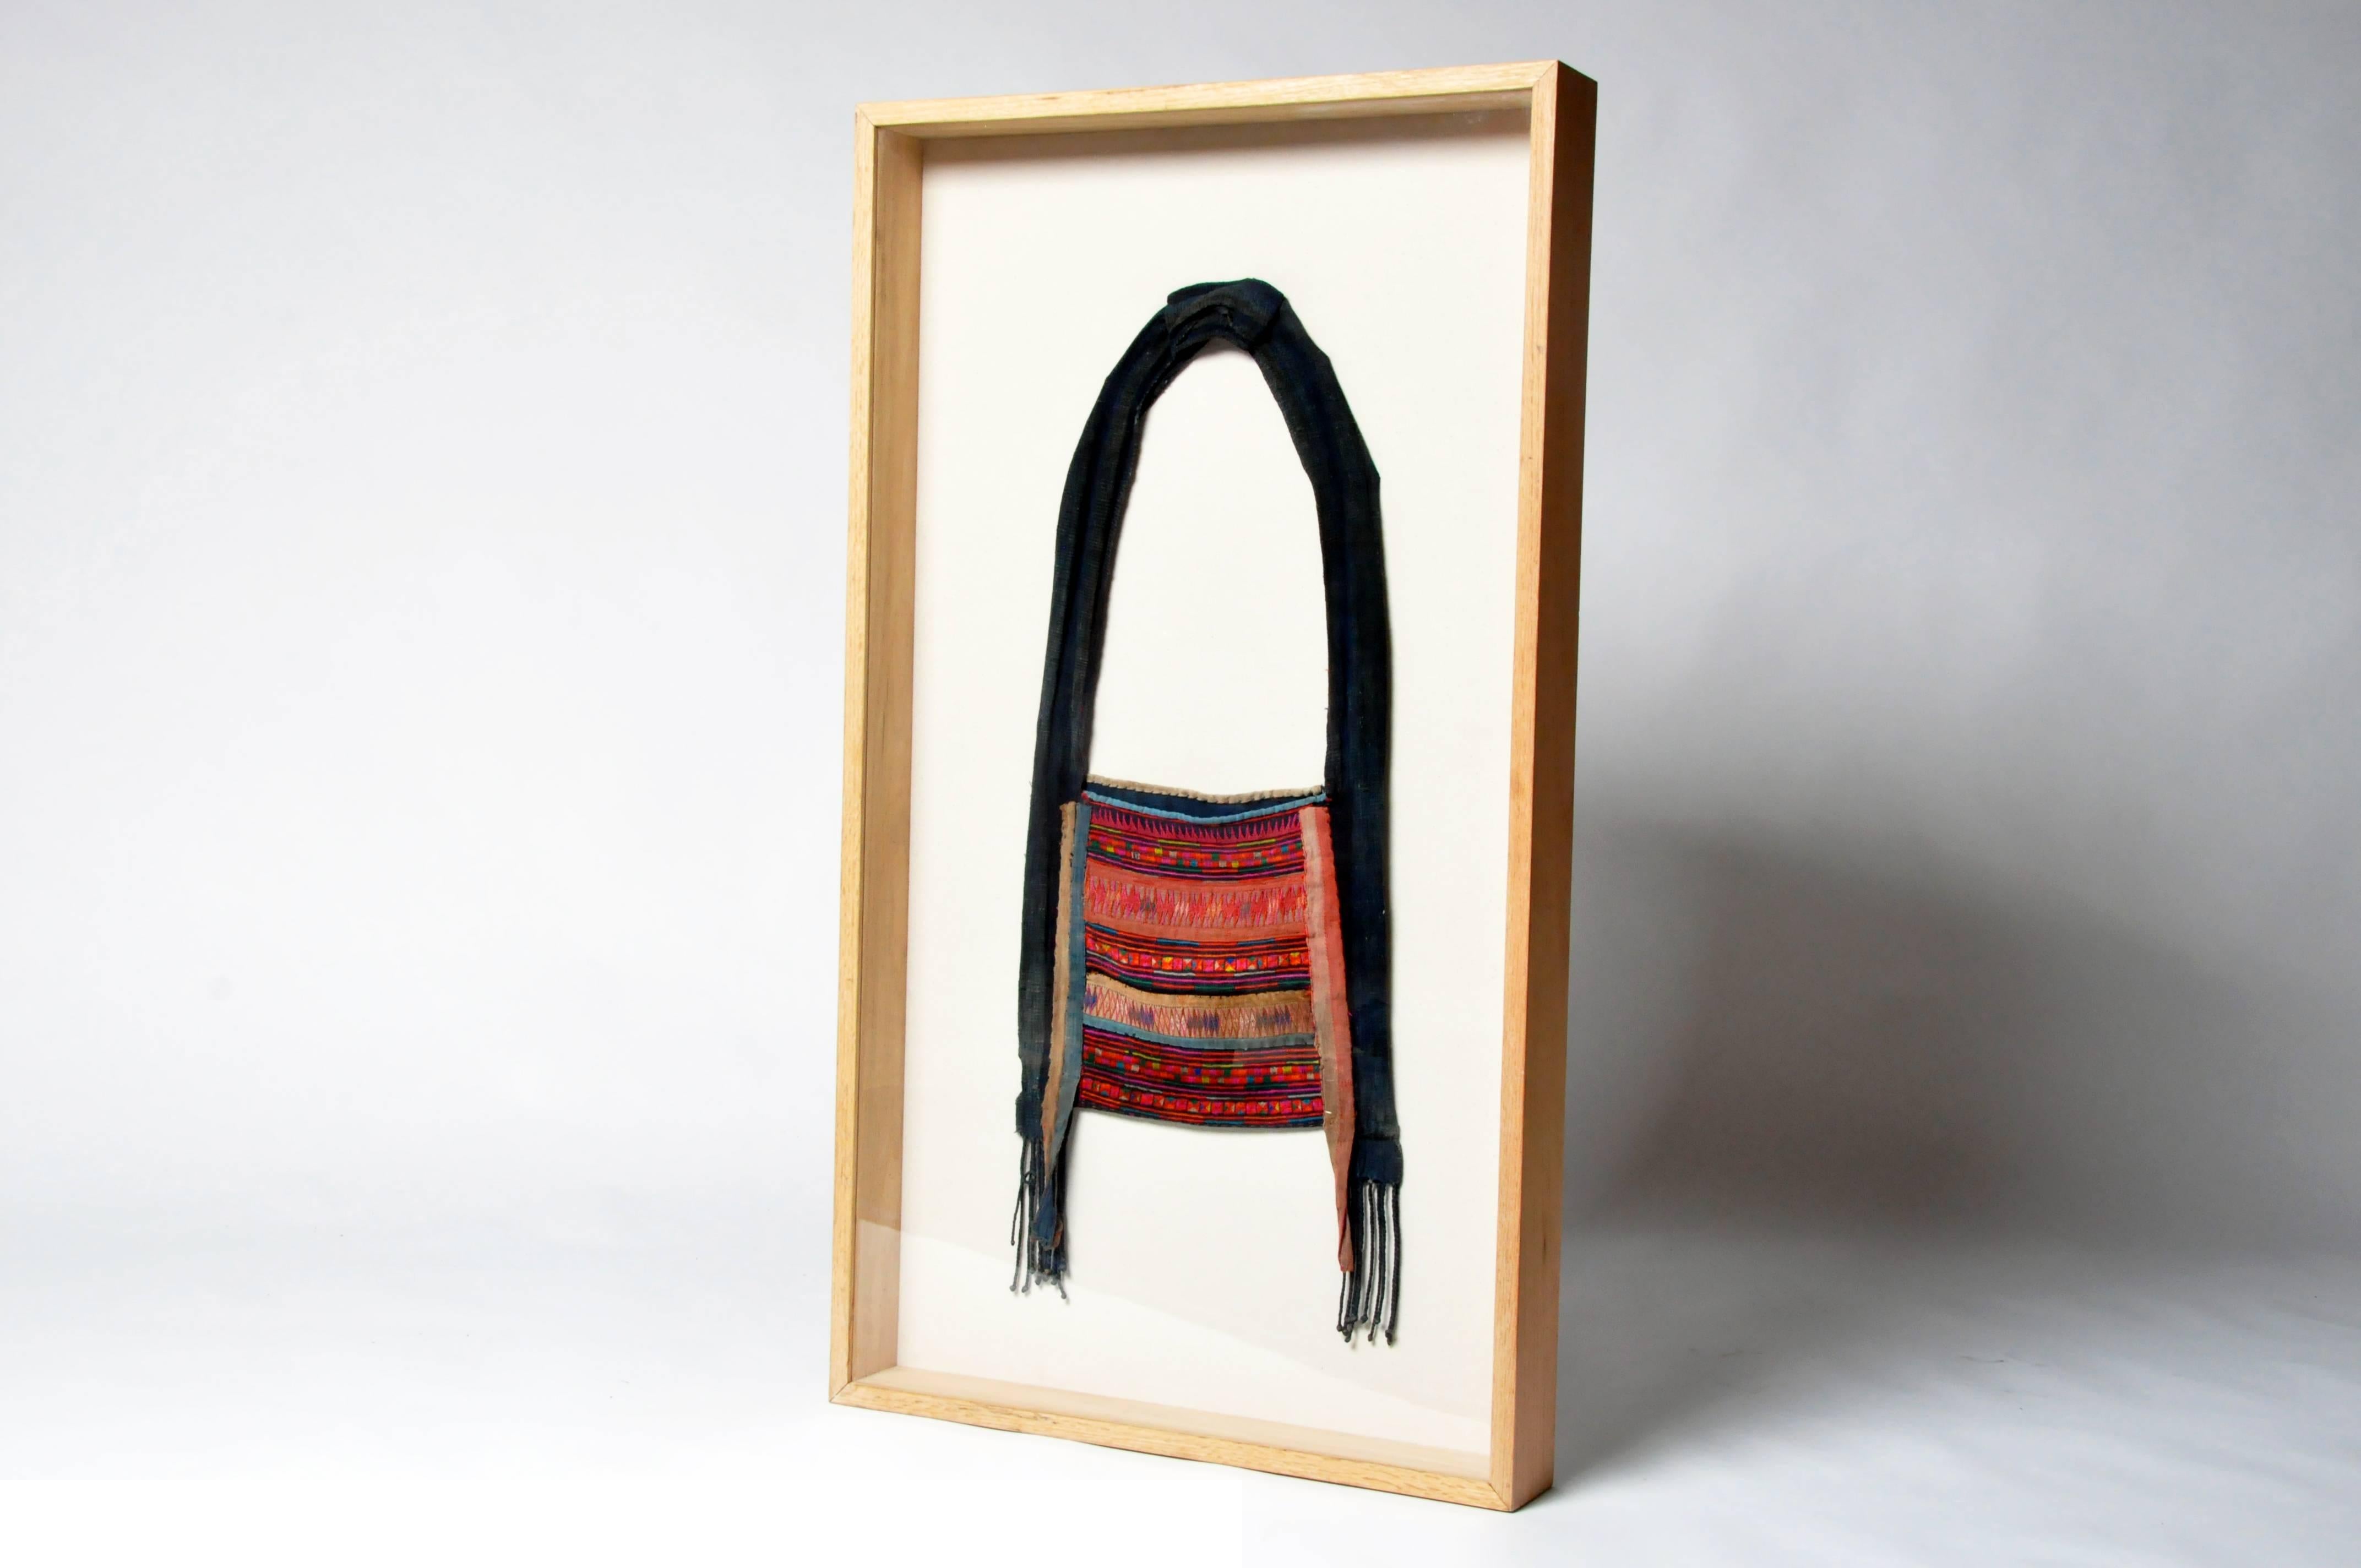 This hand embroidered shoulder bag is from the Akha tribe and has been framed for display on a wall. The Akha are an indigenous hill tribe who live in small villages at higher elevations in the mountains of Thailand, Burma, Laos, and Yunnan Province